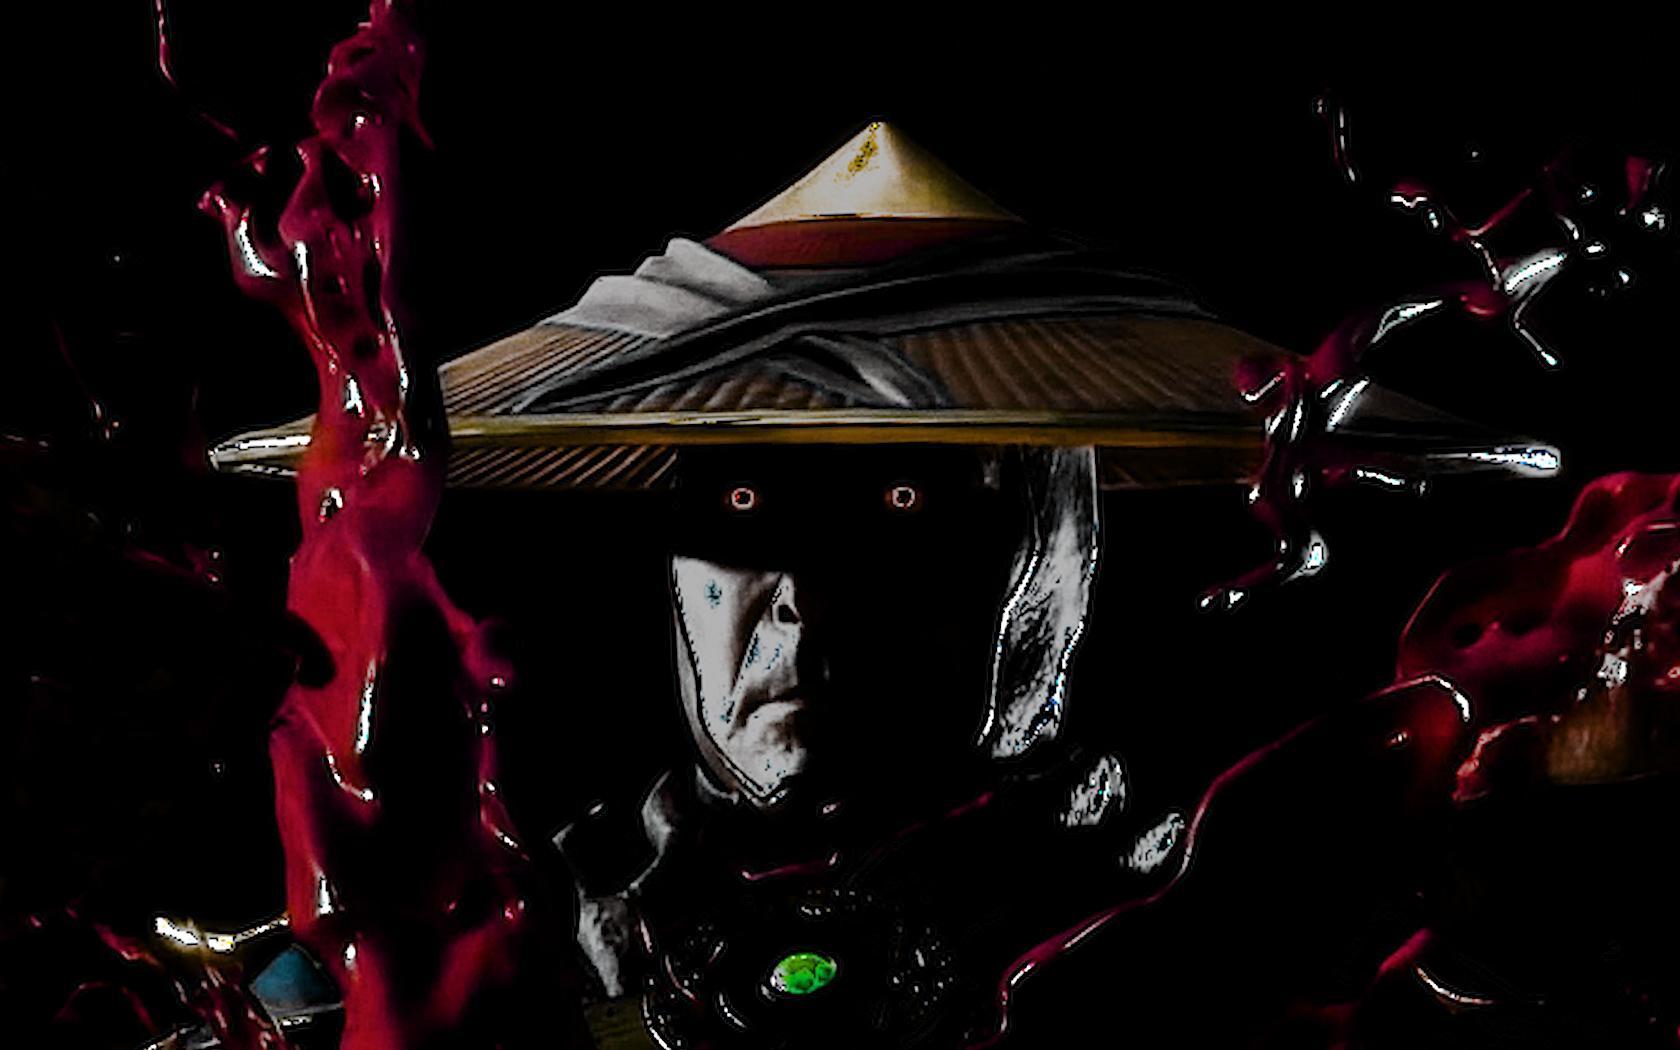 Lord Raiden seems to be very silent when he does his iconic